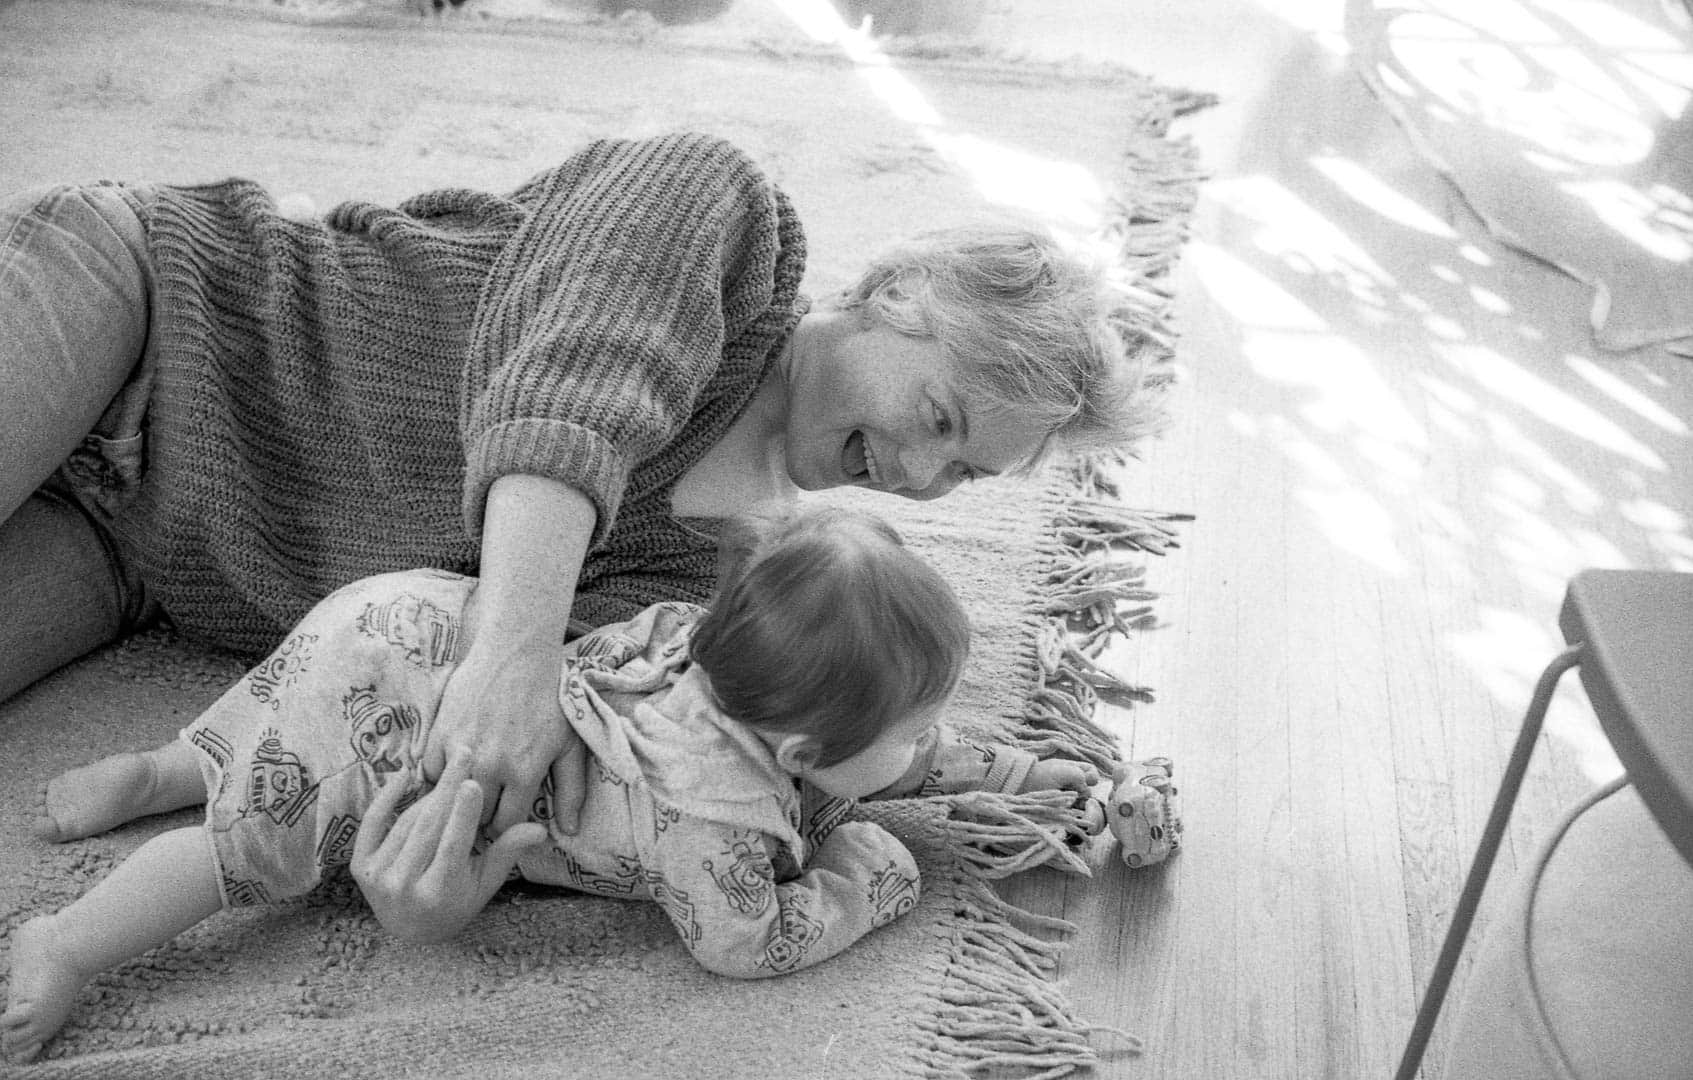 A woman and child playing on a living room floor